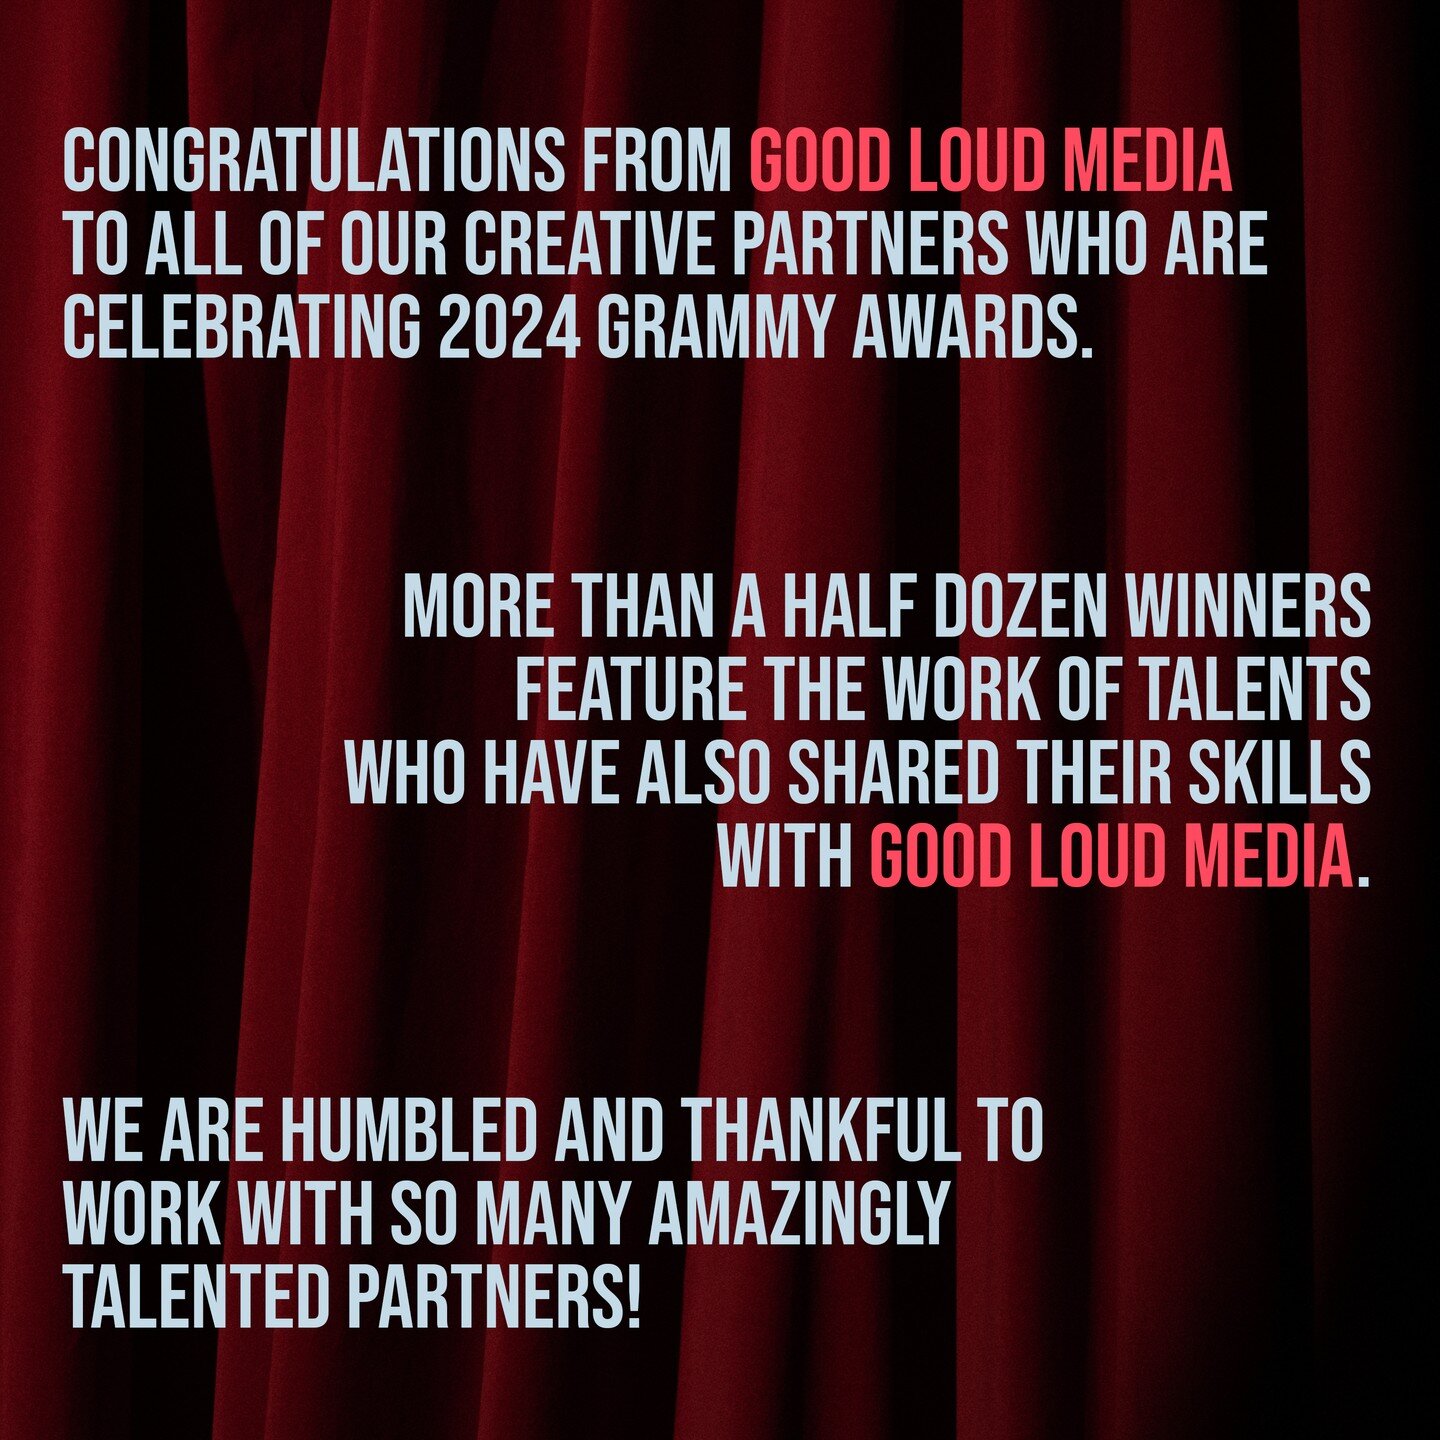 Congratulations to our creative partners! 
Visit us at goodloudmedia.org